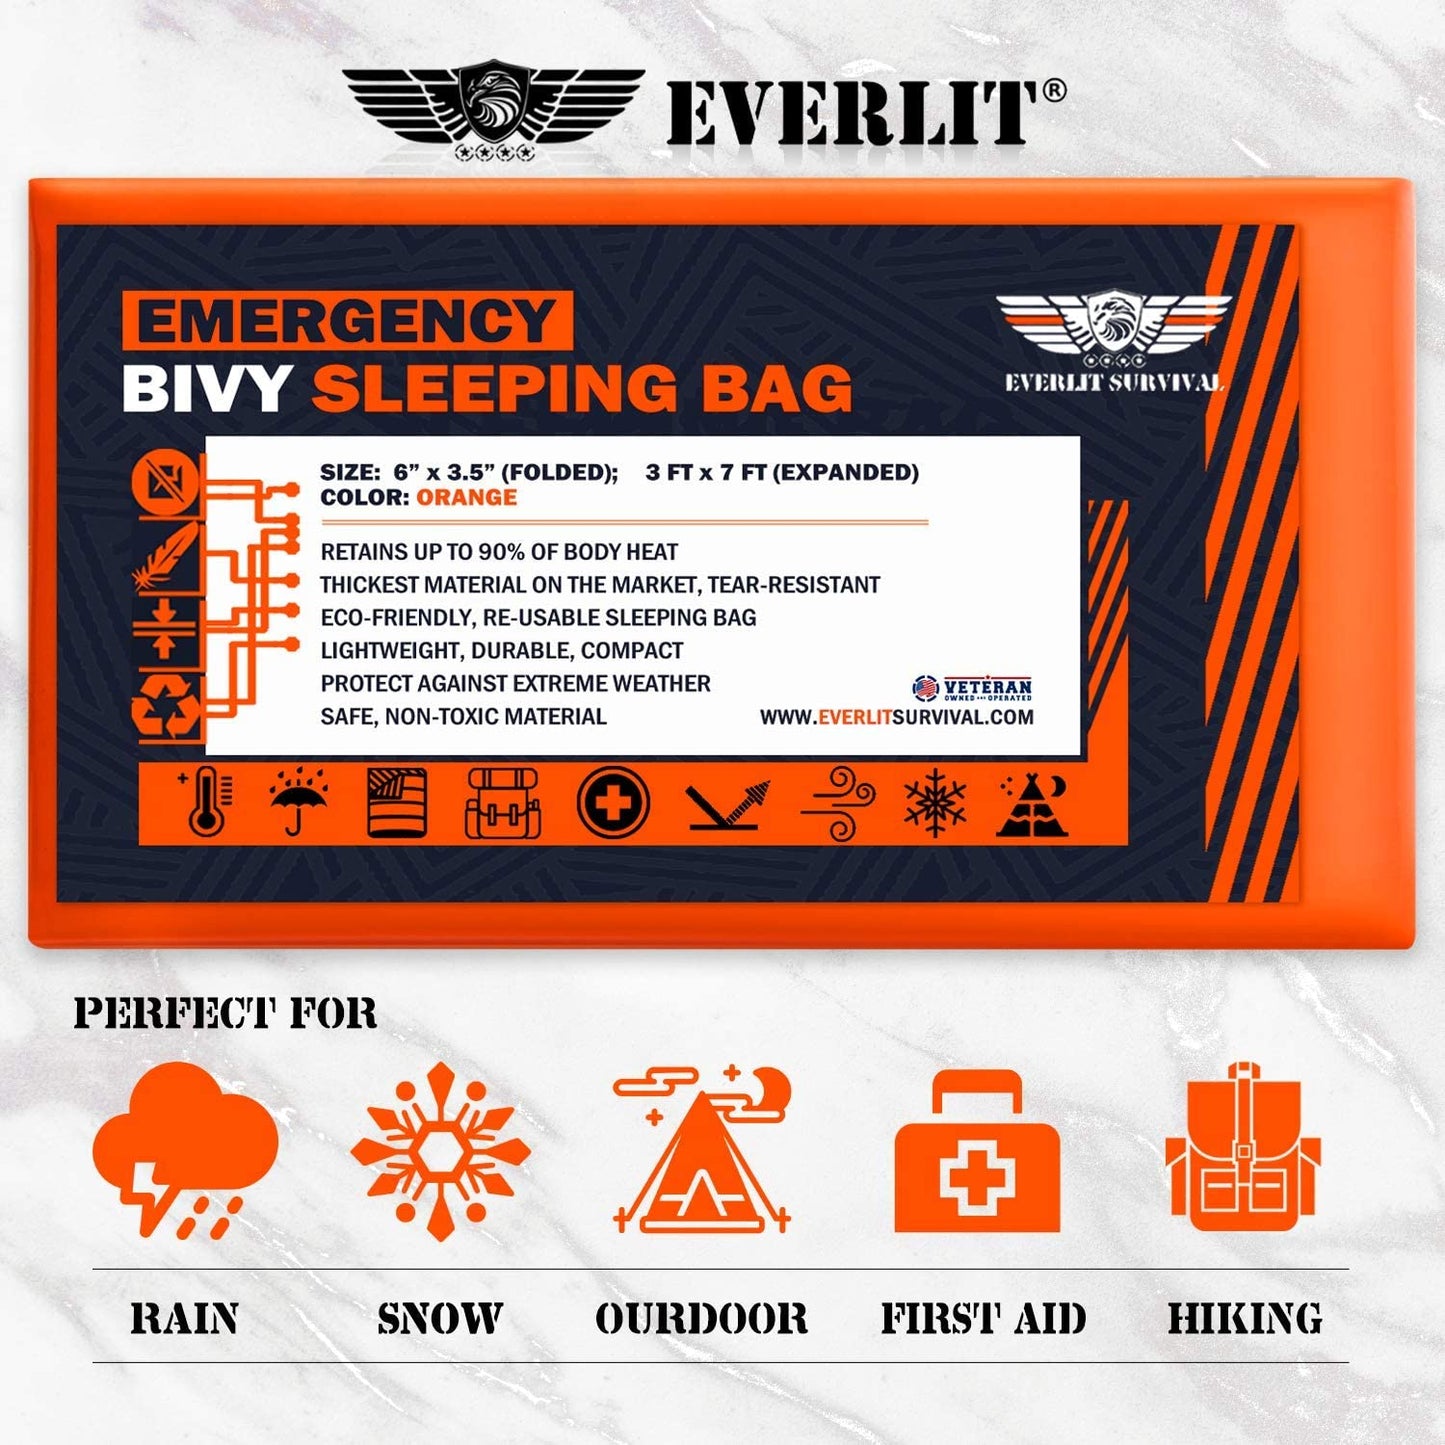 Bivy Sack Mylar Thermal Blanket Emergency Sleeping Bag Survival Kit, Glow Stick, Emergency Whistle, Multifunctional Tool Card, Tactical Pouch Perfect for Camping Hiking Outdoor